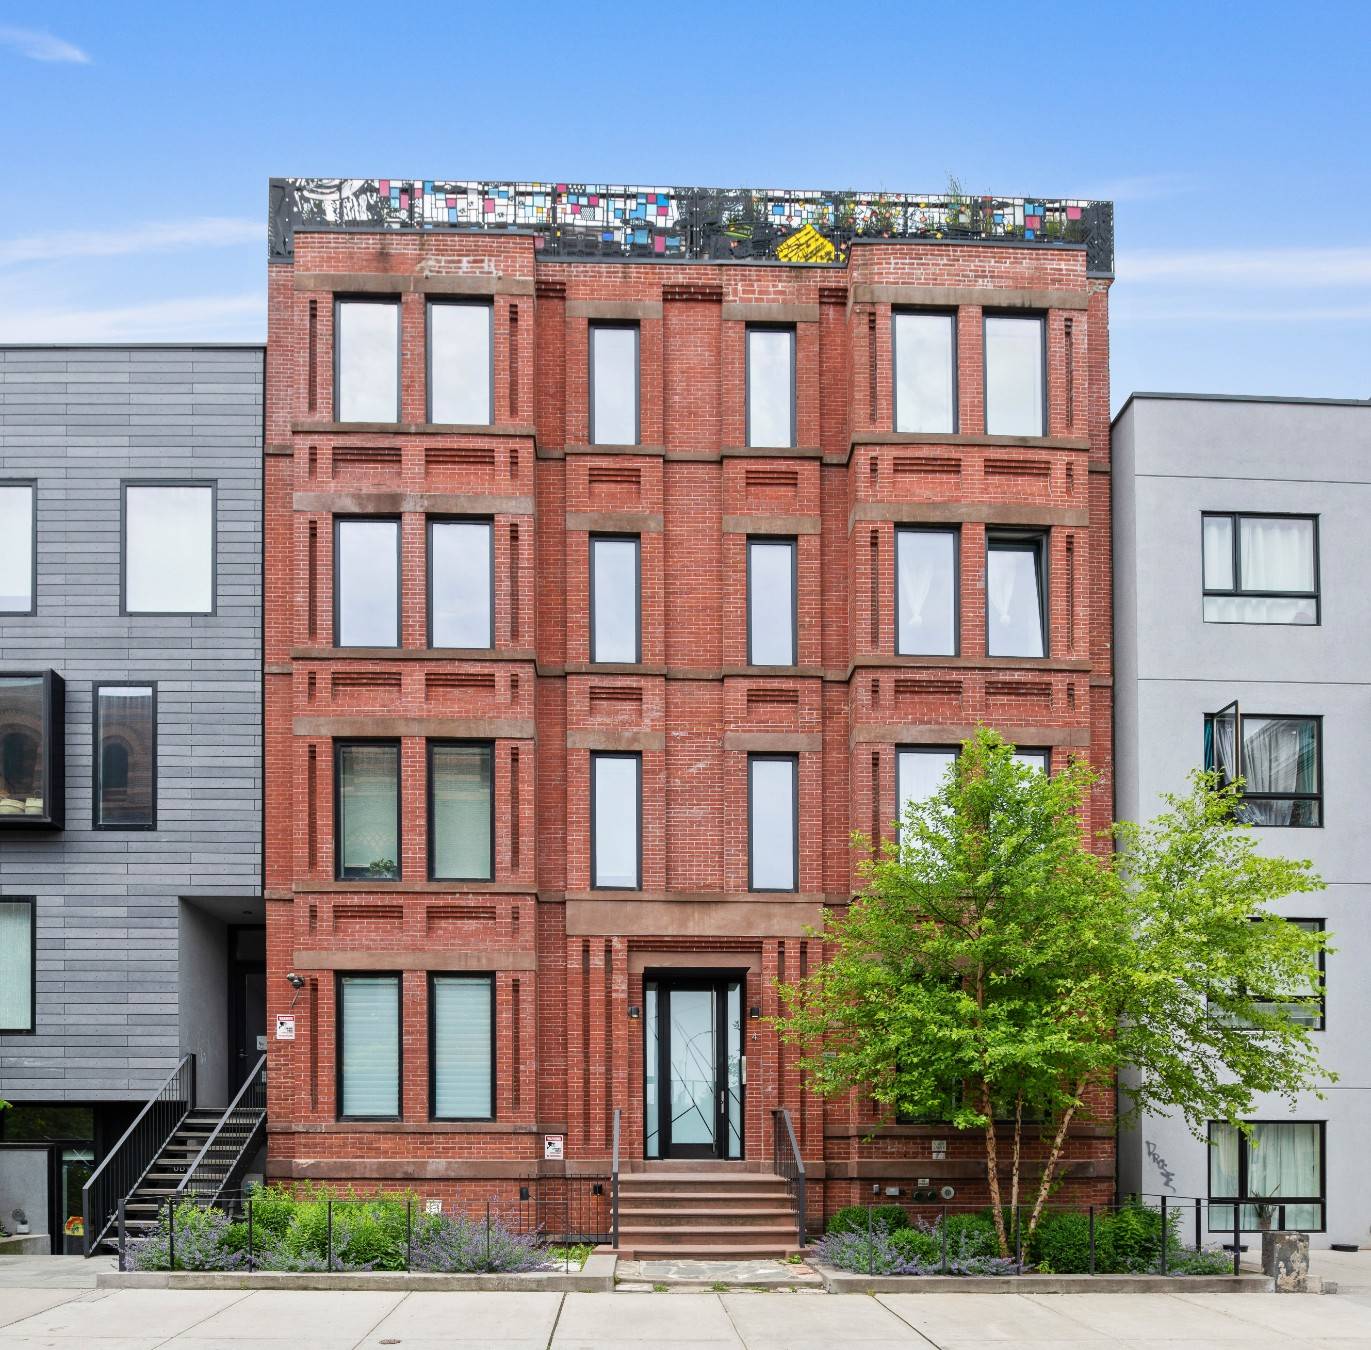 Prepare yourself to be amazed by your new home in the heart of Clinton Hill.